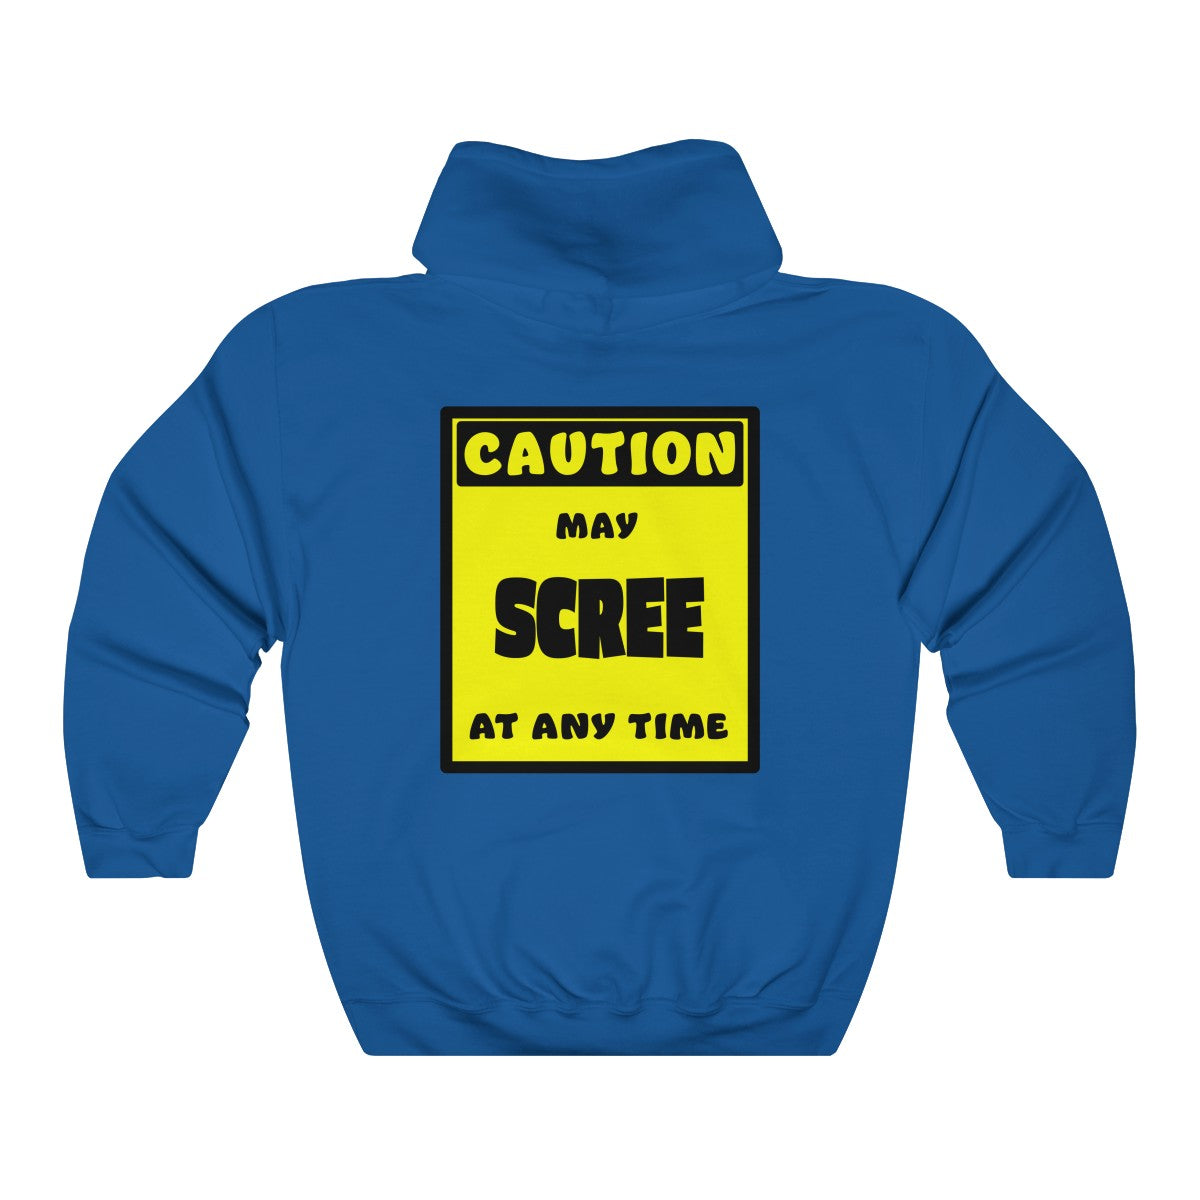 CAUTION! May SCREE at any time! - Hoodie Hoodie AFLT-Whootorca Royal Blue S 